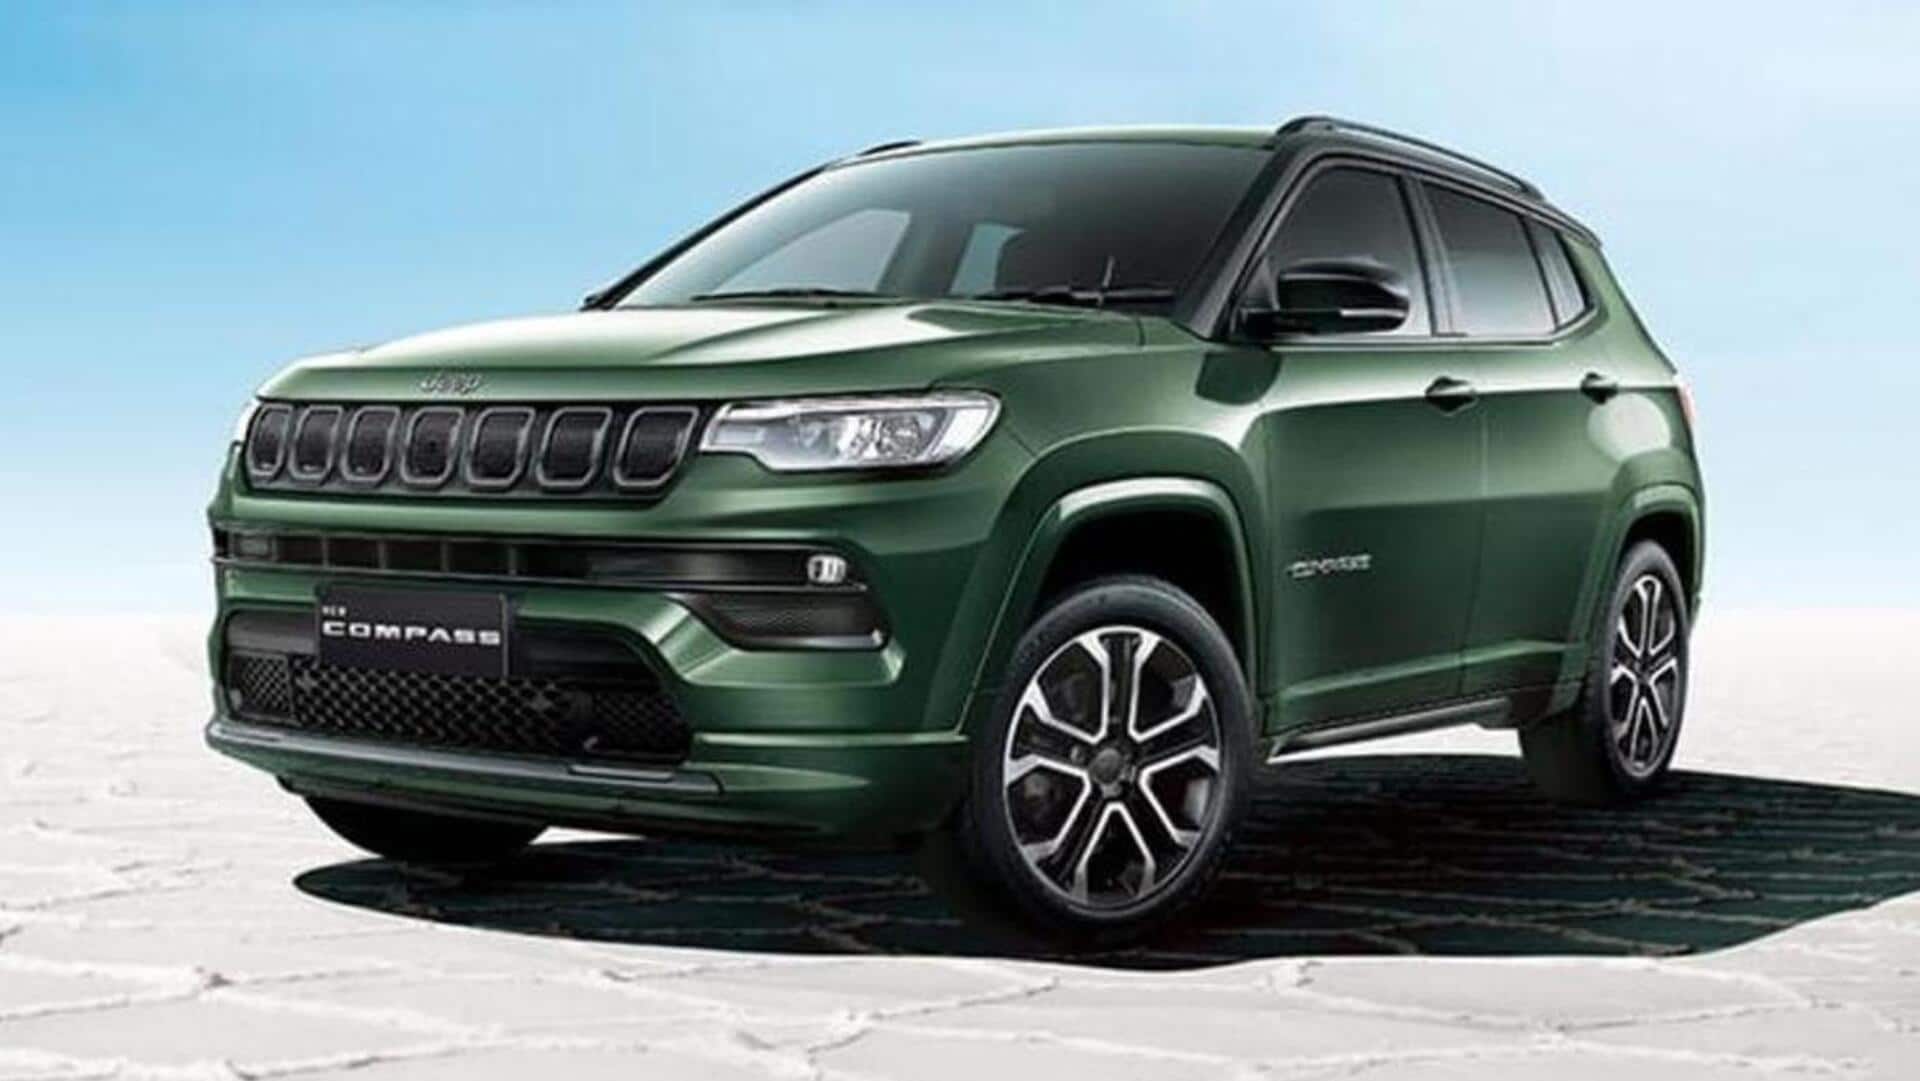 Jeep Meridian and Compass SUVs become costlier: Check new prices